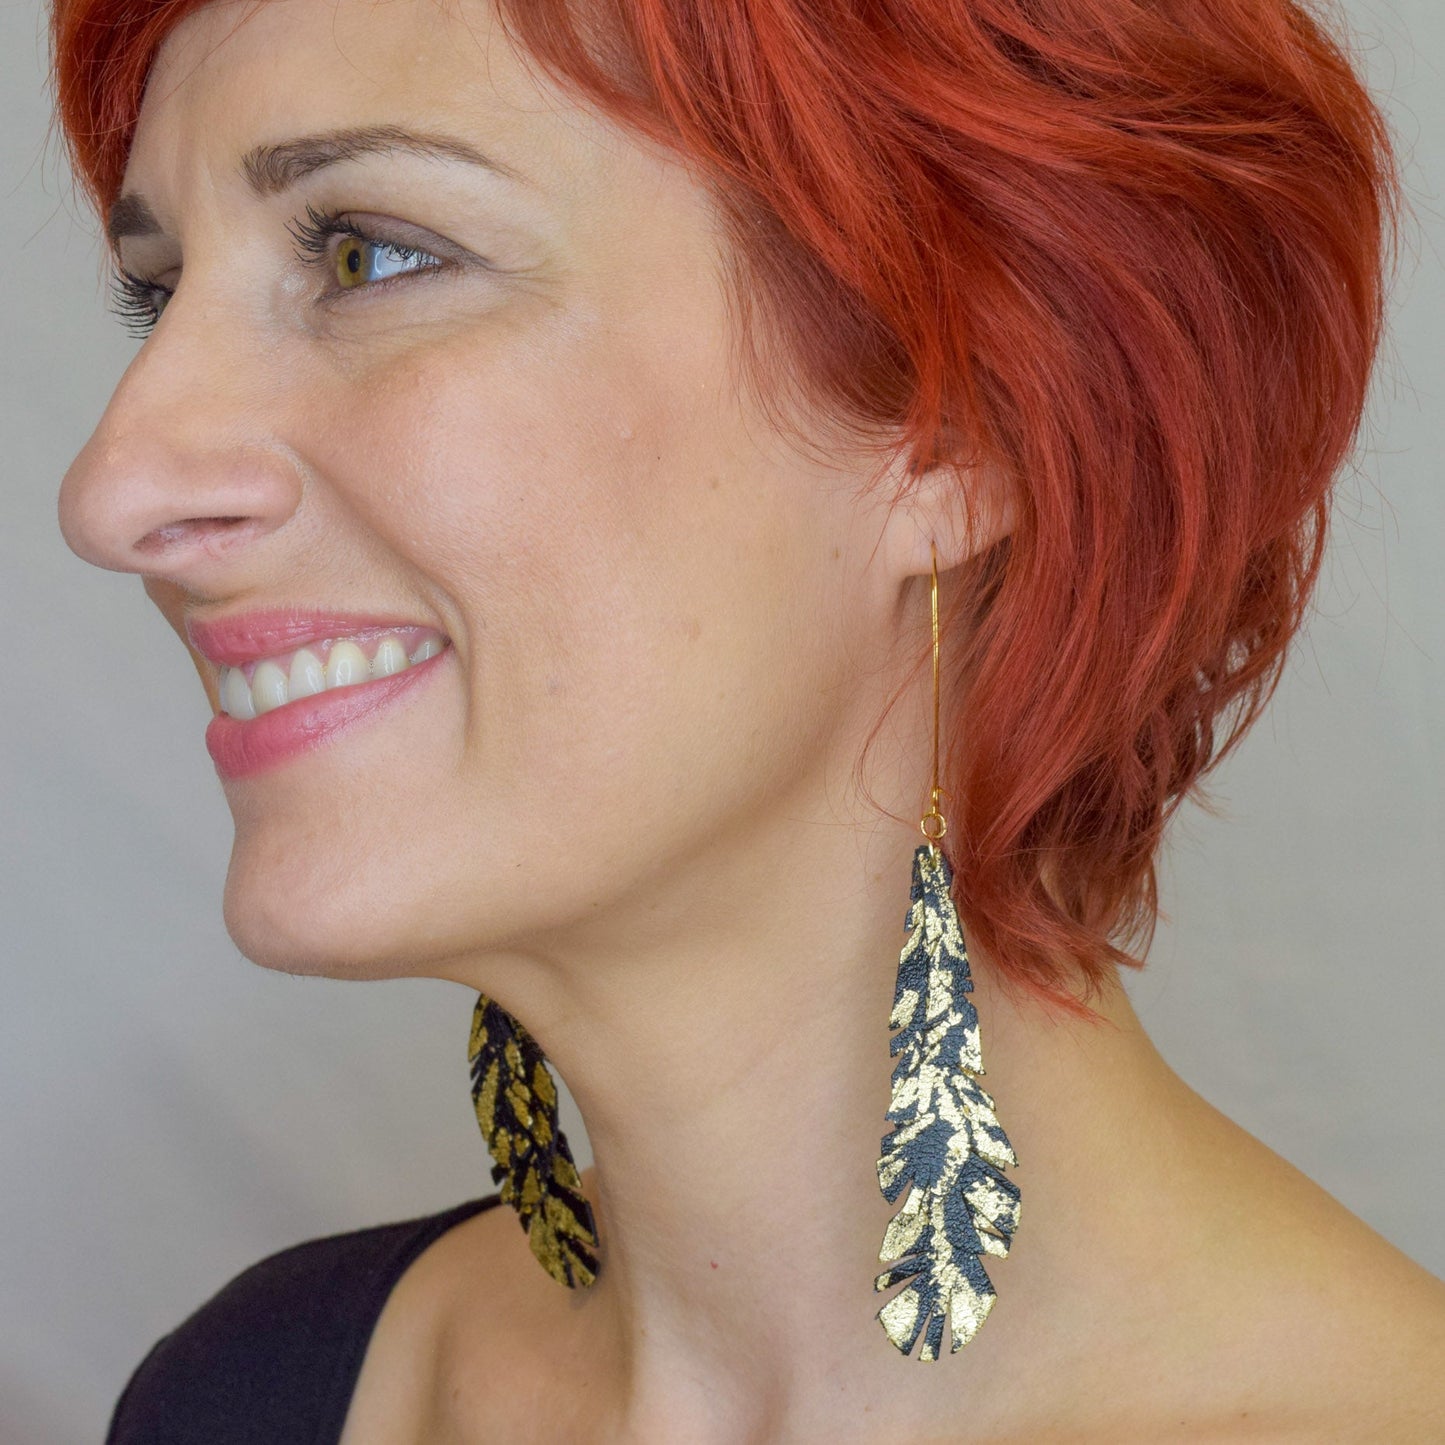 Feather Leather Earrings with Gold Metal Leaf- Black